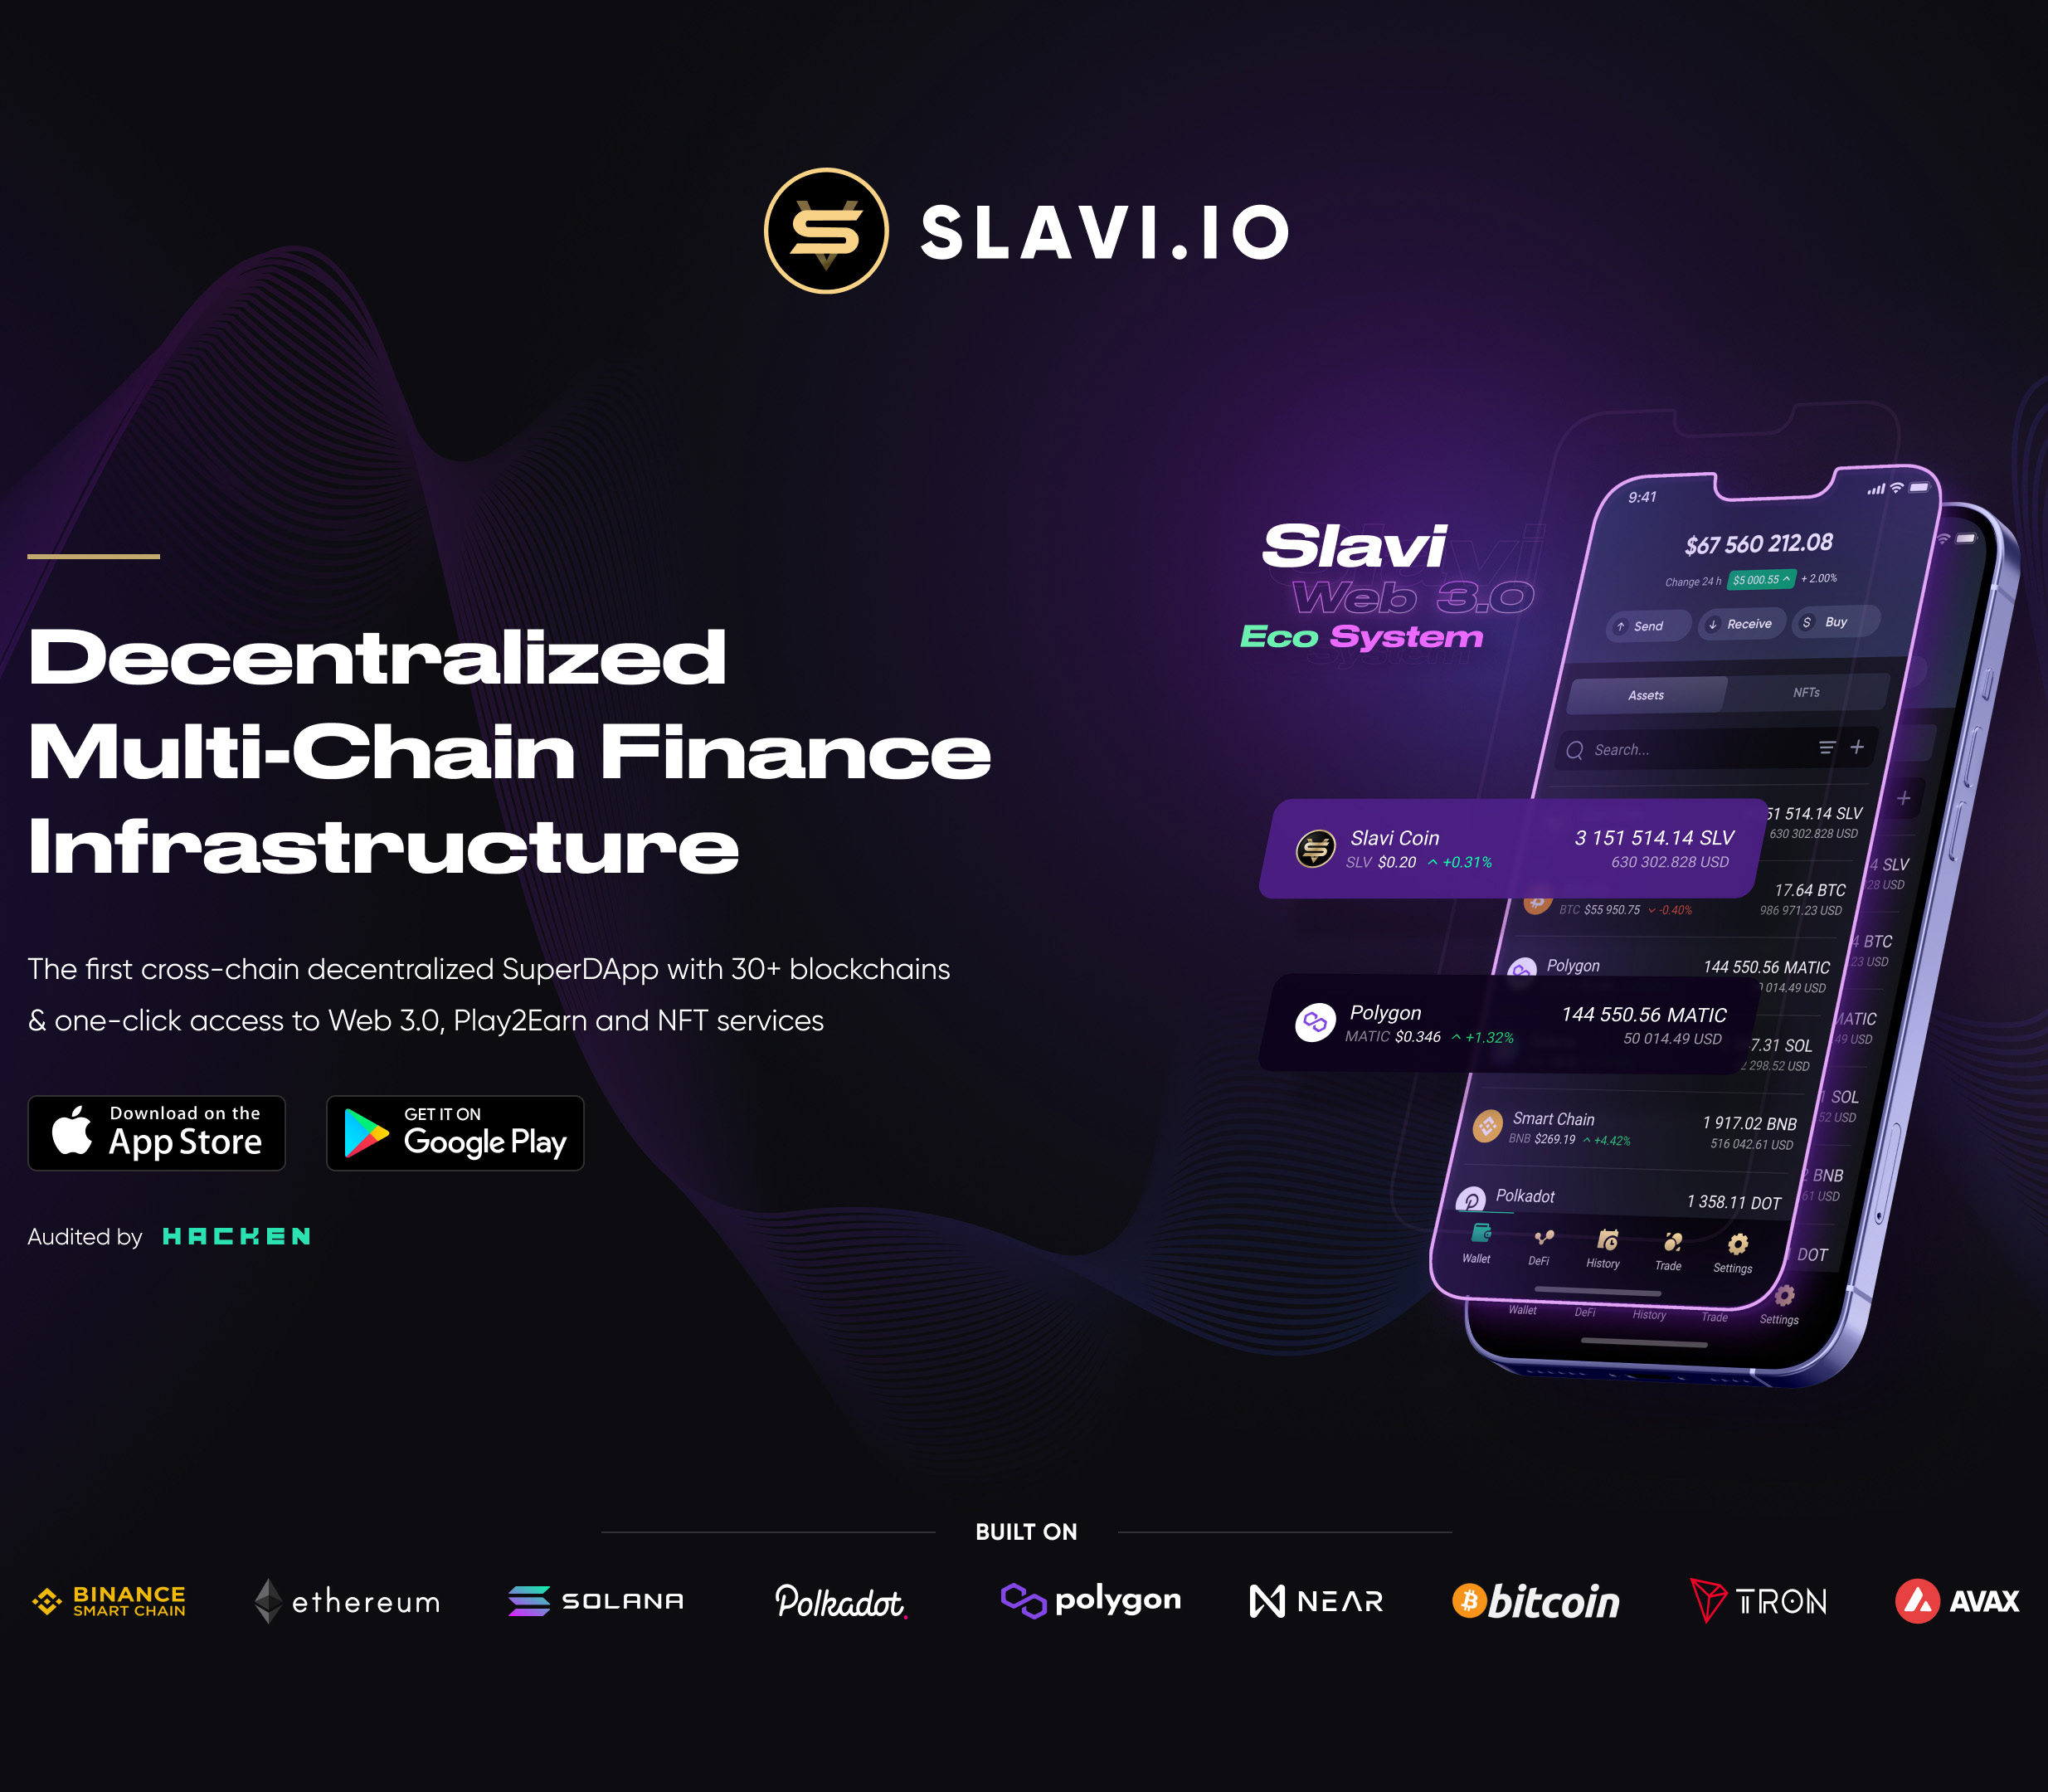 Slavi Presents First Prototype of Innovative Crypto ATM and Got 5 Awards Including "I Success International Awards" From Forbes Monaco